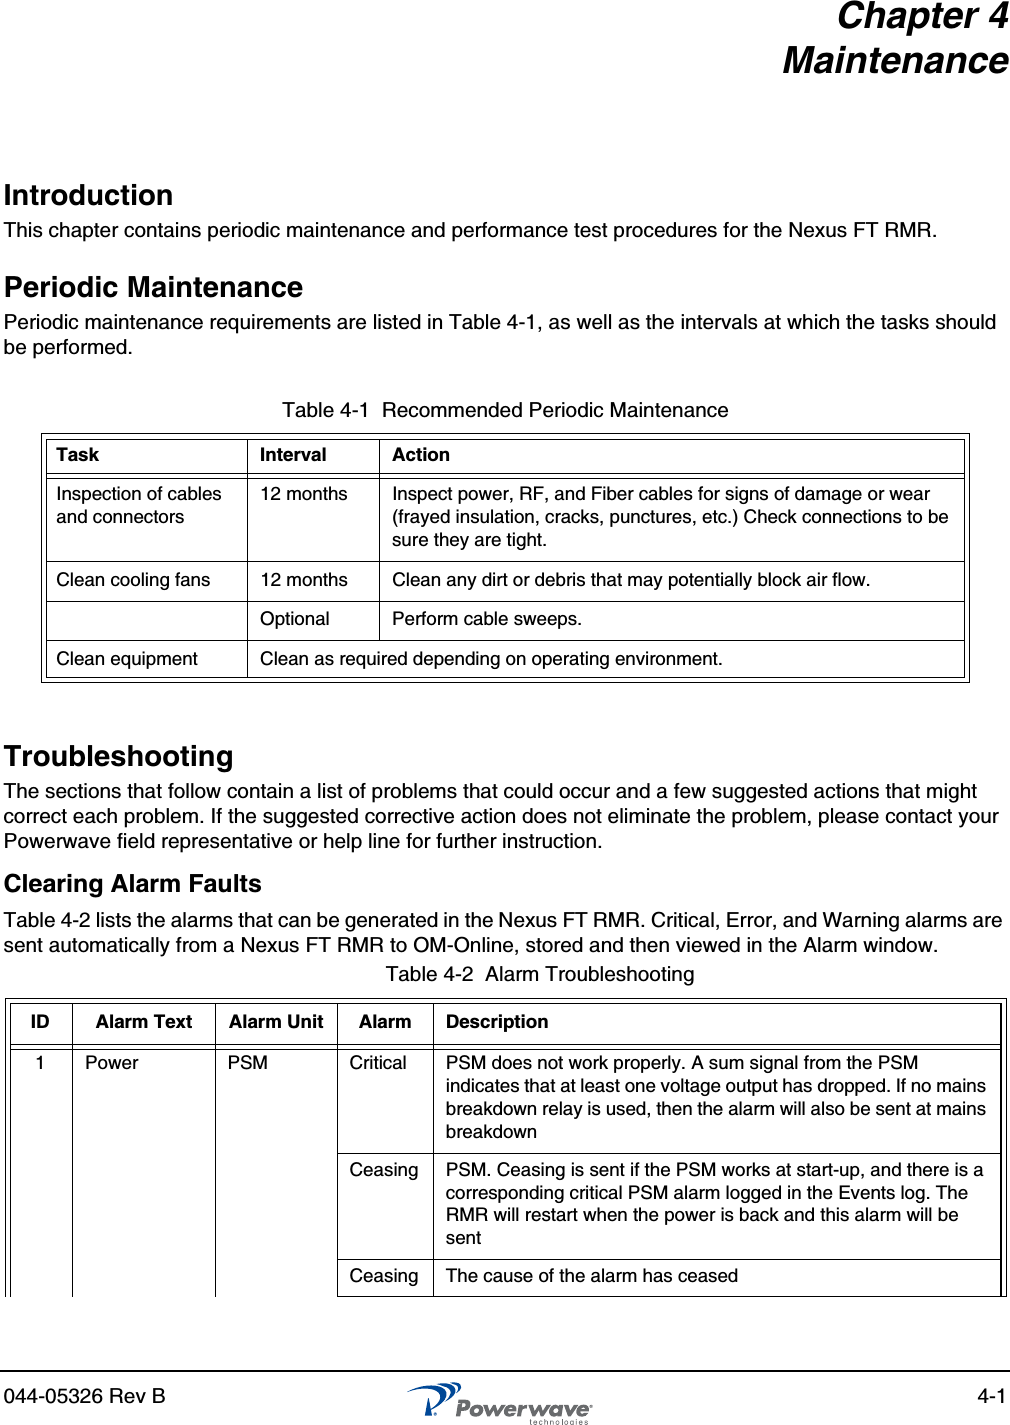 044-05326 Rev B 4-1Chapter 4MaintenanceIntroductionThis chapter contains periodic maintenance and performance test procedures for the Nexus FT RMR.Periodic MaintenancePeriodic maintenance requirements are listed in Table 4-1, as well as the intervals at which the tasks should be performed.TroubleshootingThe sections that follow contain a list of problems that could occur and a few suggested actions that might correct each problem. If the suggested corrective action does not eliminate the problem, please contact your Powerwave field representative or help line for further instruction.Clearing Alarm FaultsTable 4-2 lists the alarms that can be generated in the Nexus FT RMR. Critical, Error, and Warning alarms are sent automatically from a Nexus FT RMR to OM-Online, stored and then viewed in the Alarm window.Table 4-1  Recommended Periodic MaintenanceTask Interval ActionInspection of cables and connectors12 months Inspect power, RF, and Fiber cables for signs of damage or wear (frayed insulation, cracks, punctures, etc.) Check connections to be sure they are tight.Clean cooling fans 12 months Clean any dirt or debris that may potentially block air flow.Optional Perform cable sweeps.Clean equipment Clean as required depending on operating environment.Table 4-2  Alarm TroubleshootingID Alarm Text Alarm Unit Alarm Description1 Power PSM Critical PSM does not work properly. A sum signal from the PSM indicates that at least one voltage output has dropped. If no mains breakdown relay is used, then the alarm will also be sent at mains breakdownCeasing PSM. Ceasing is sent if the PSM works at start-up, and there is a corresponding critical PSM alarm logged in the Events log. The RMR will restart when the power is back and this alarm will be sentCeasing The cause of the alarm has ceased